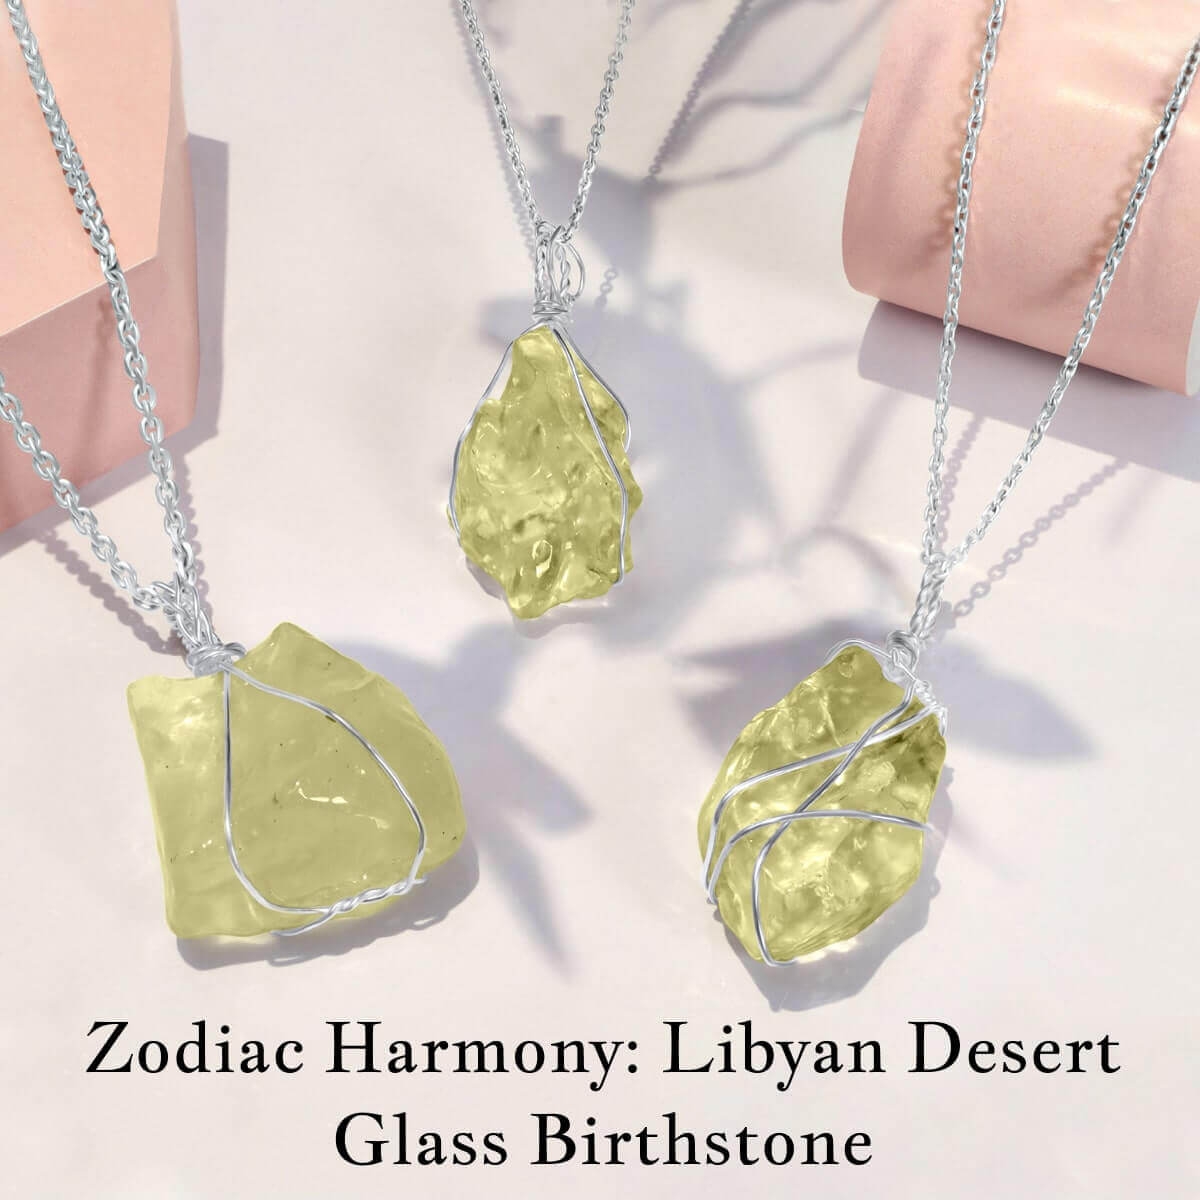 Libyan Desert Glass is The Birthstone of Which Zodiac Sign